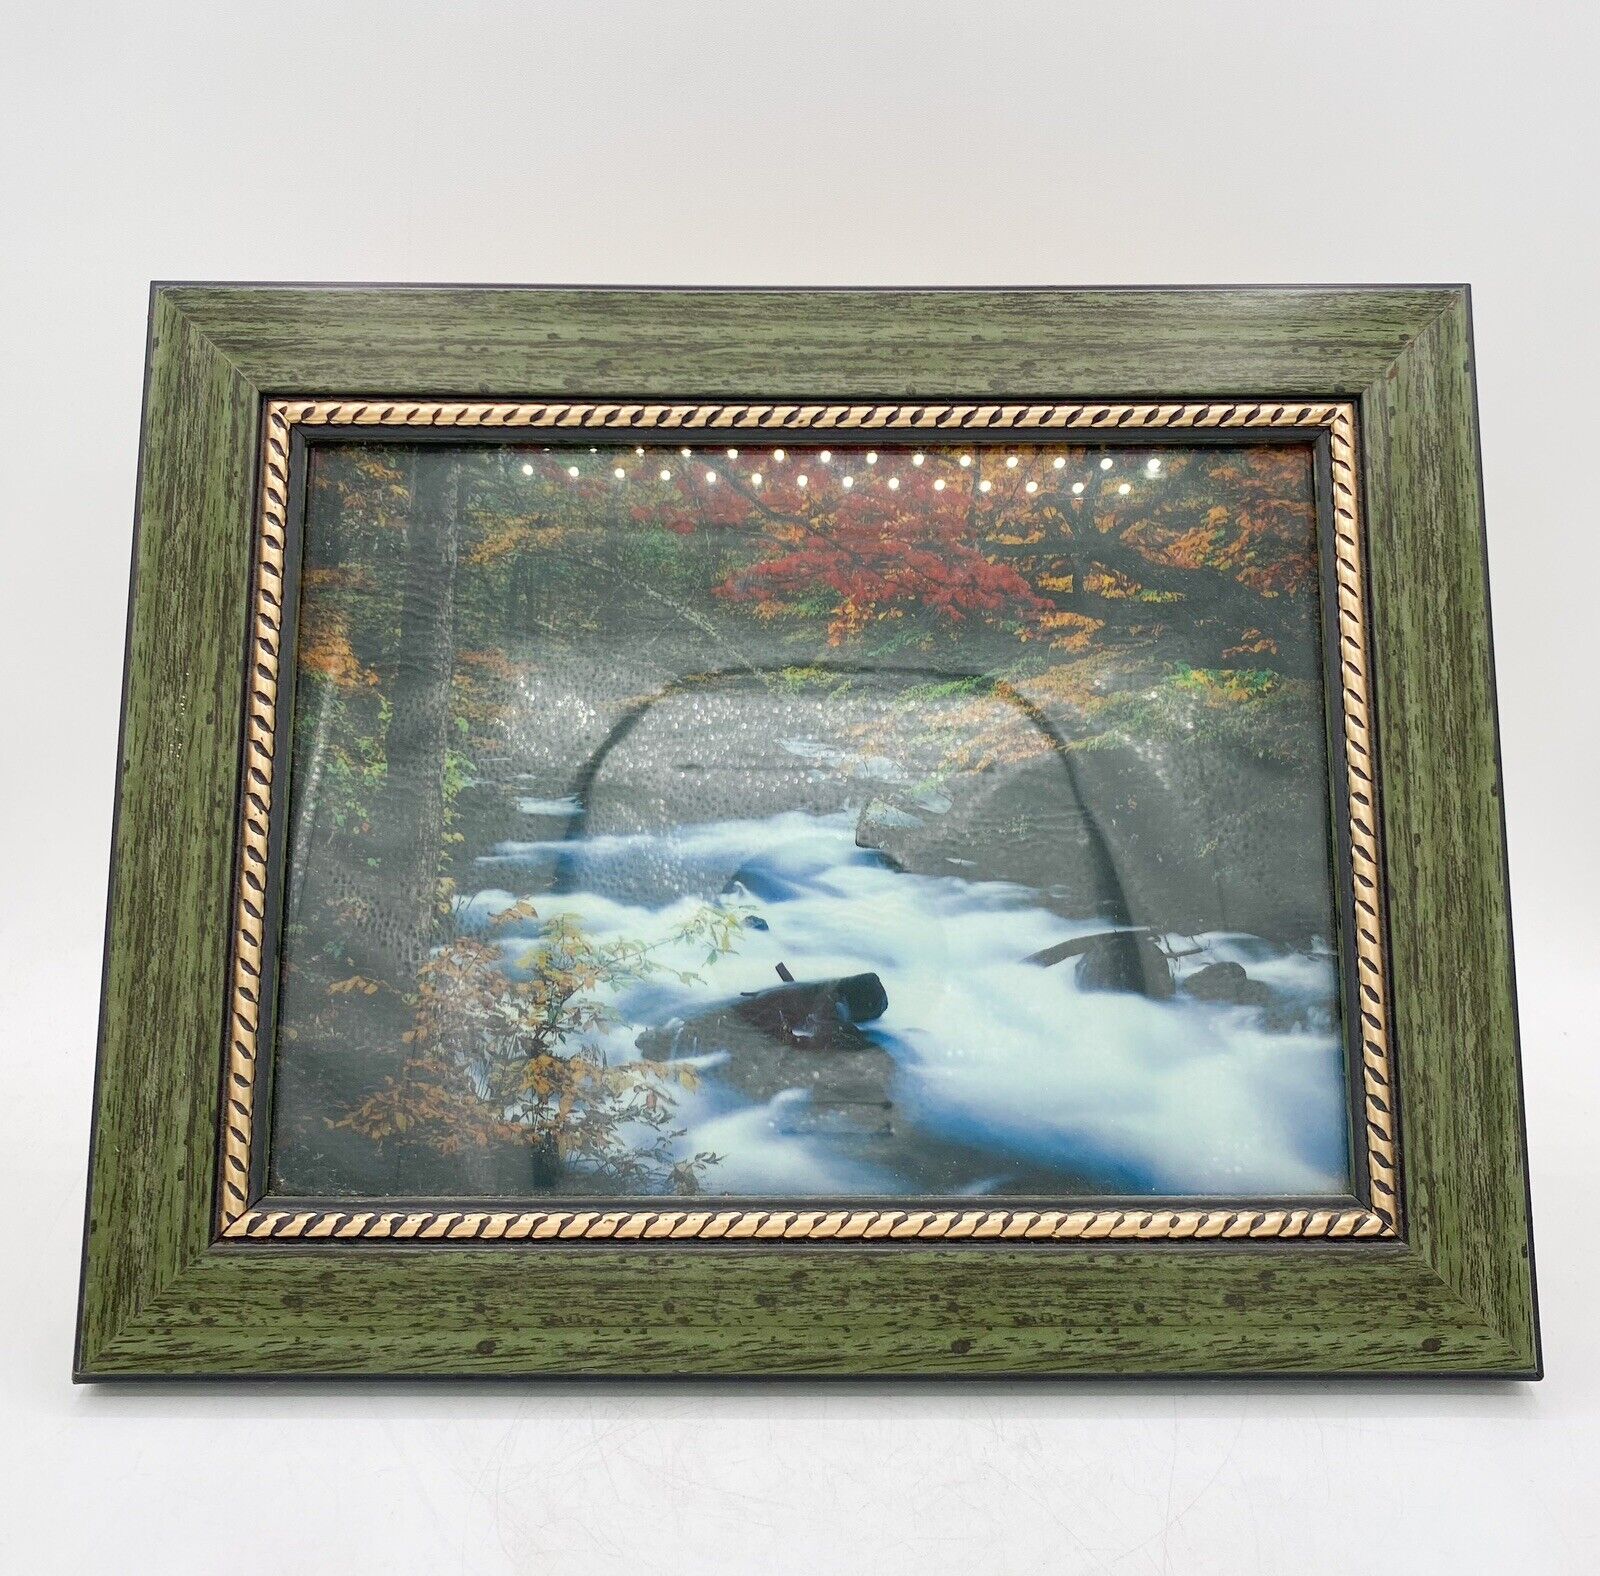 Vintage 80s Light Up Motion River Waterfall Framed Picture With Bird Sounds 10x7